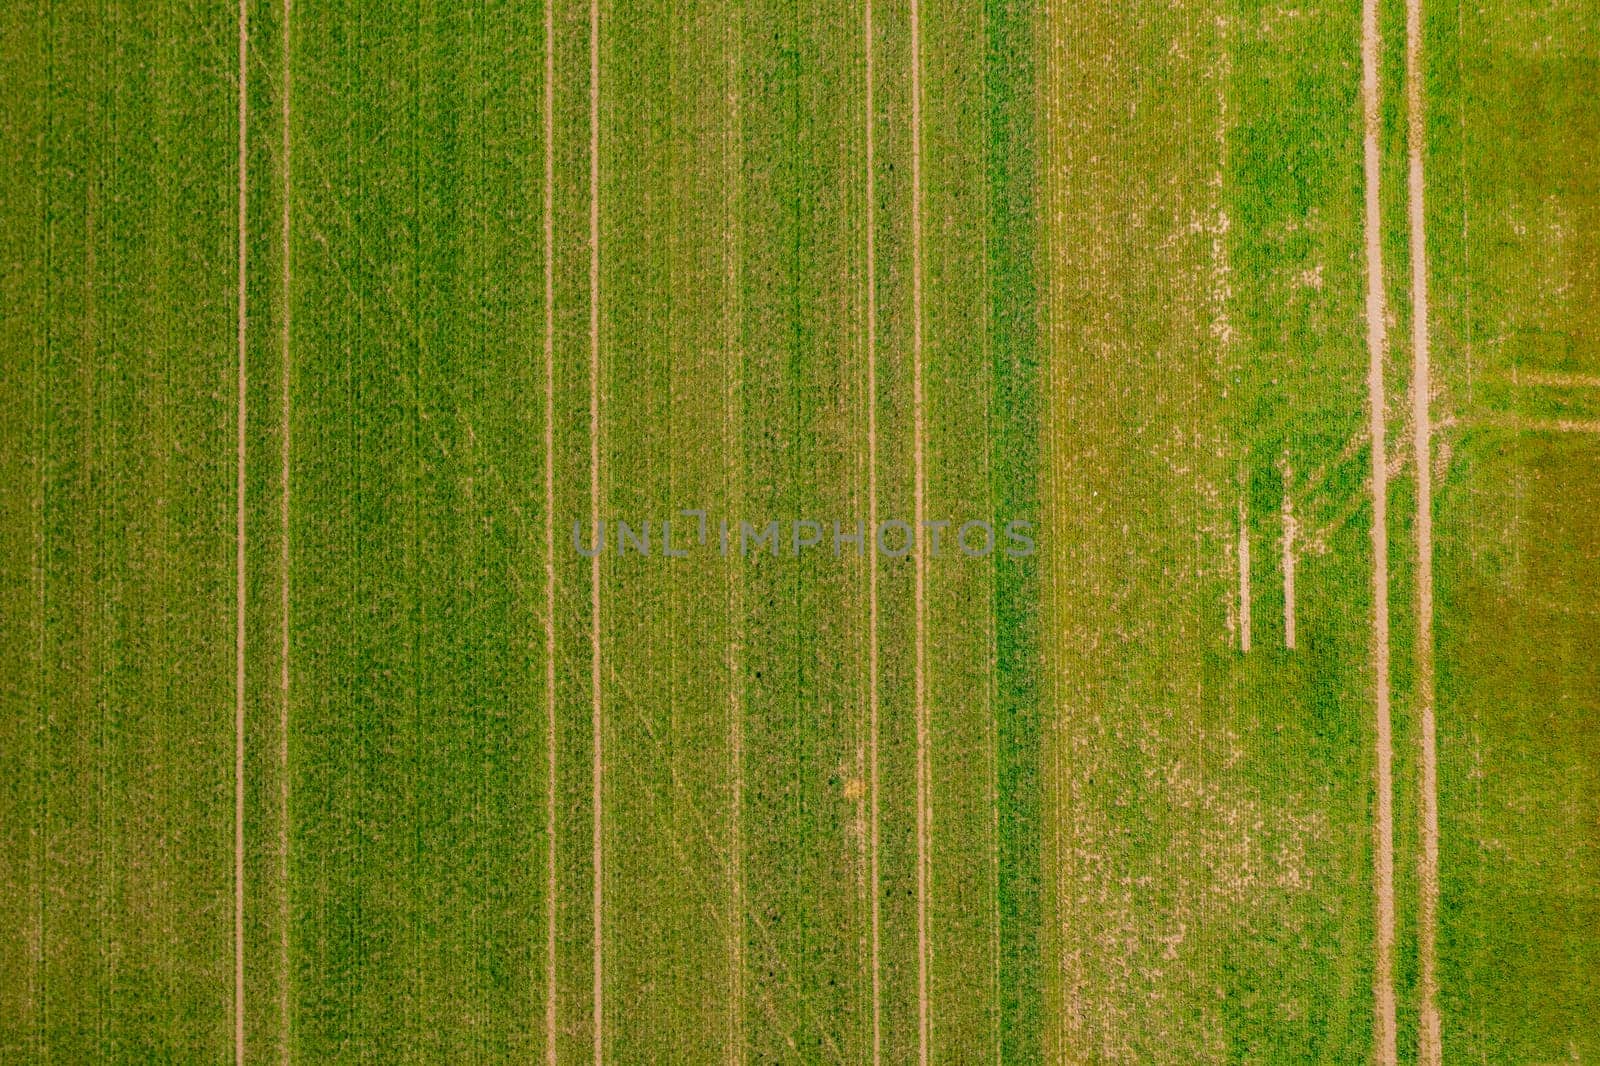 Aerial view of a field with a pattern of lines of tractor tracks by astrosoft